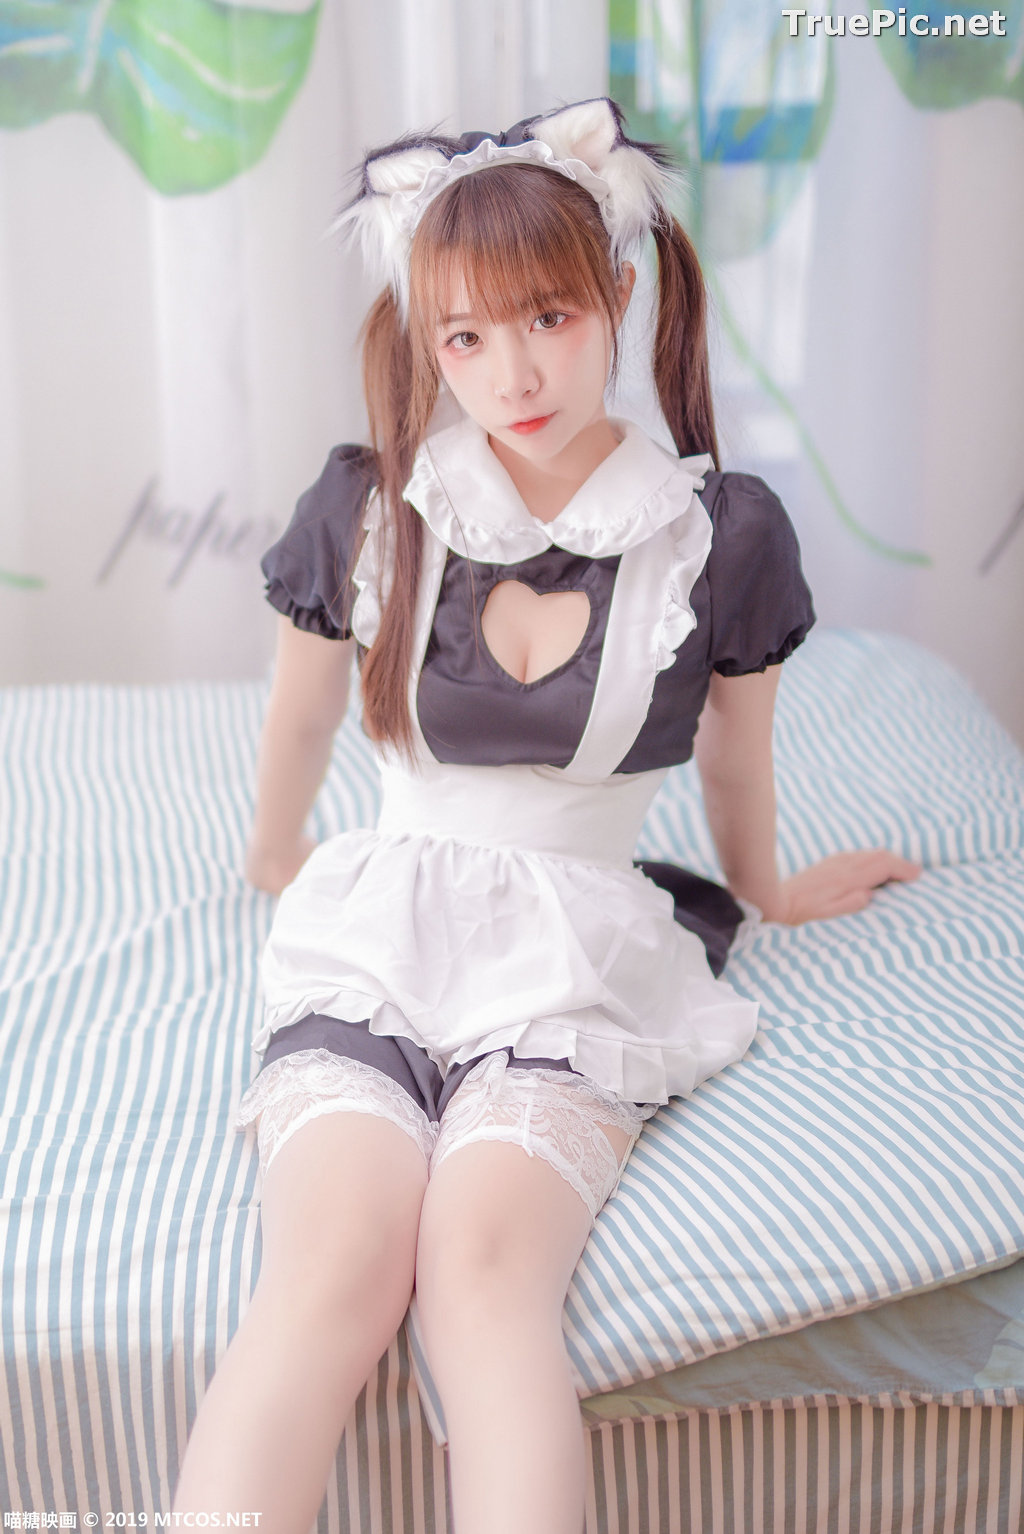 Image [MTCos] 喵糖映画 Vol.049 - Chinese Cute Model - Lovely Maid Cat - TruePic.net - Picture-25